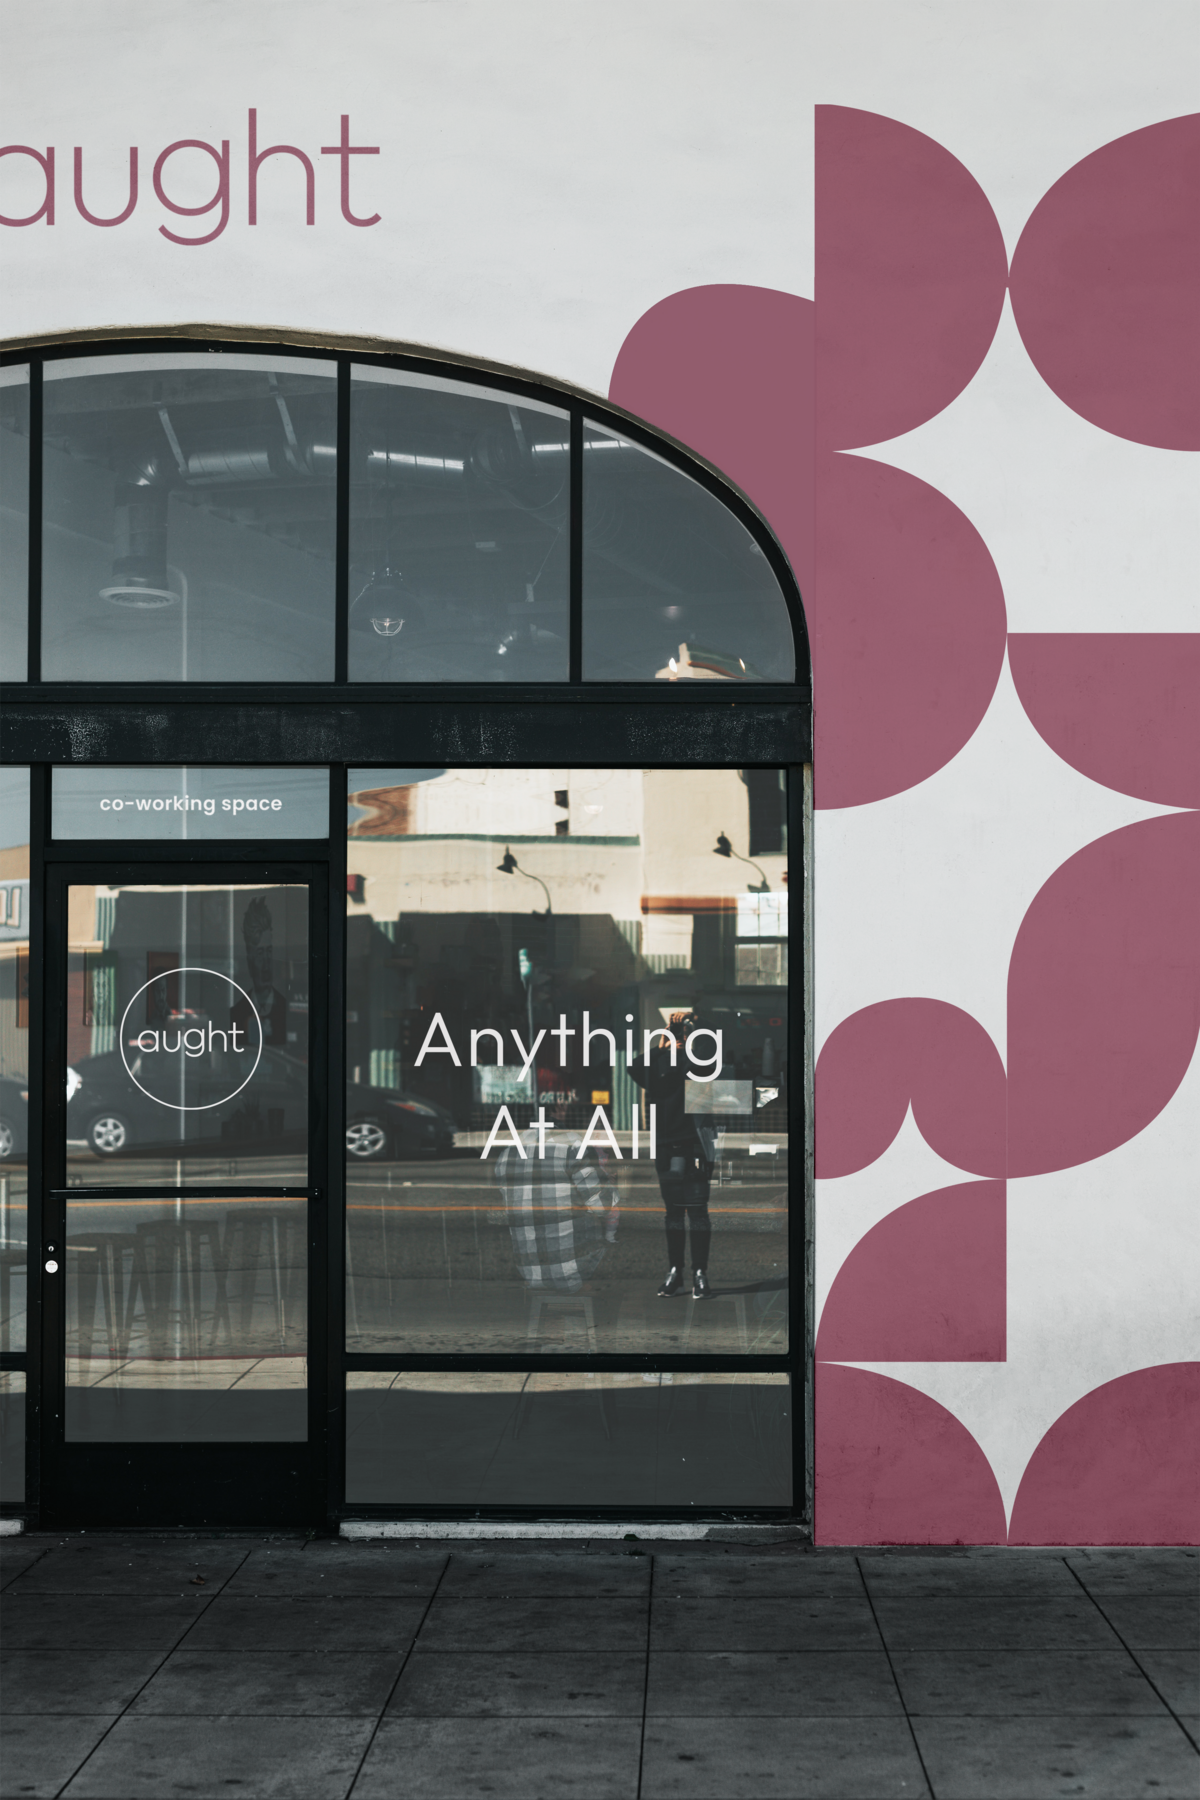 Brand identity for coworking space mocked up on front of building, windows, glass doors, with geometric brand pattern mural designed by Knoxville design agency Liberty Type